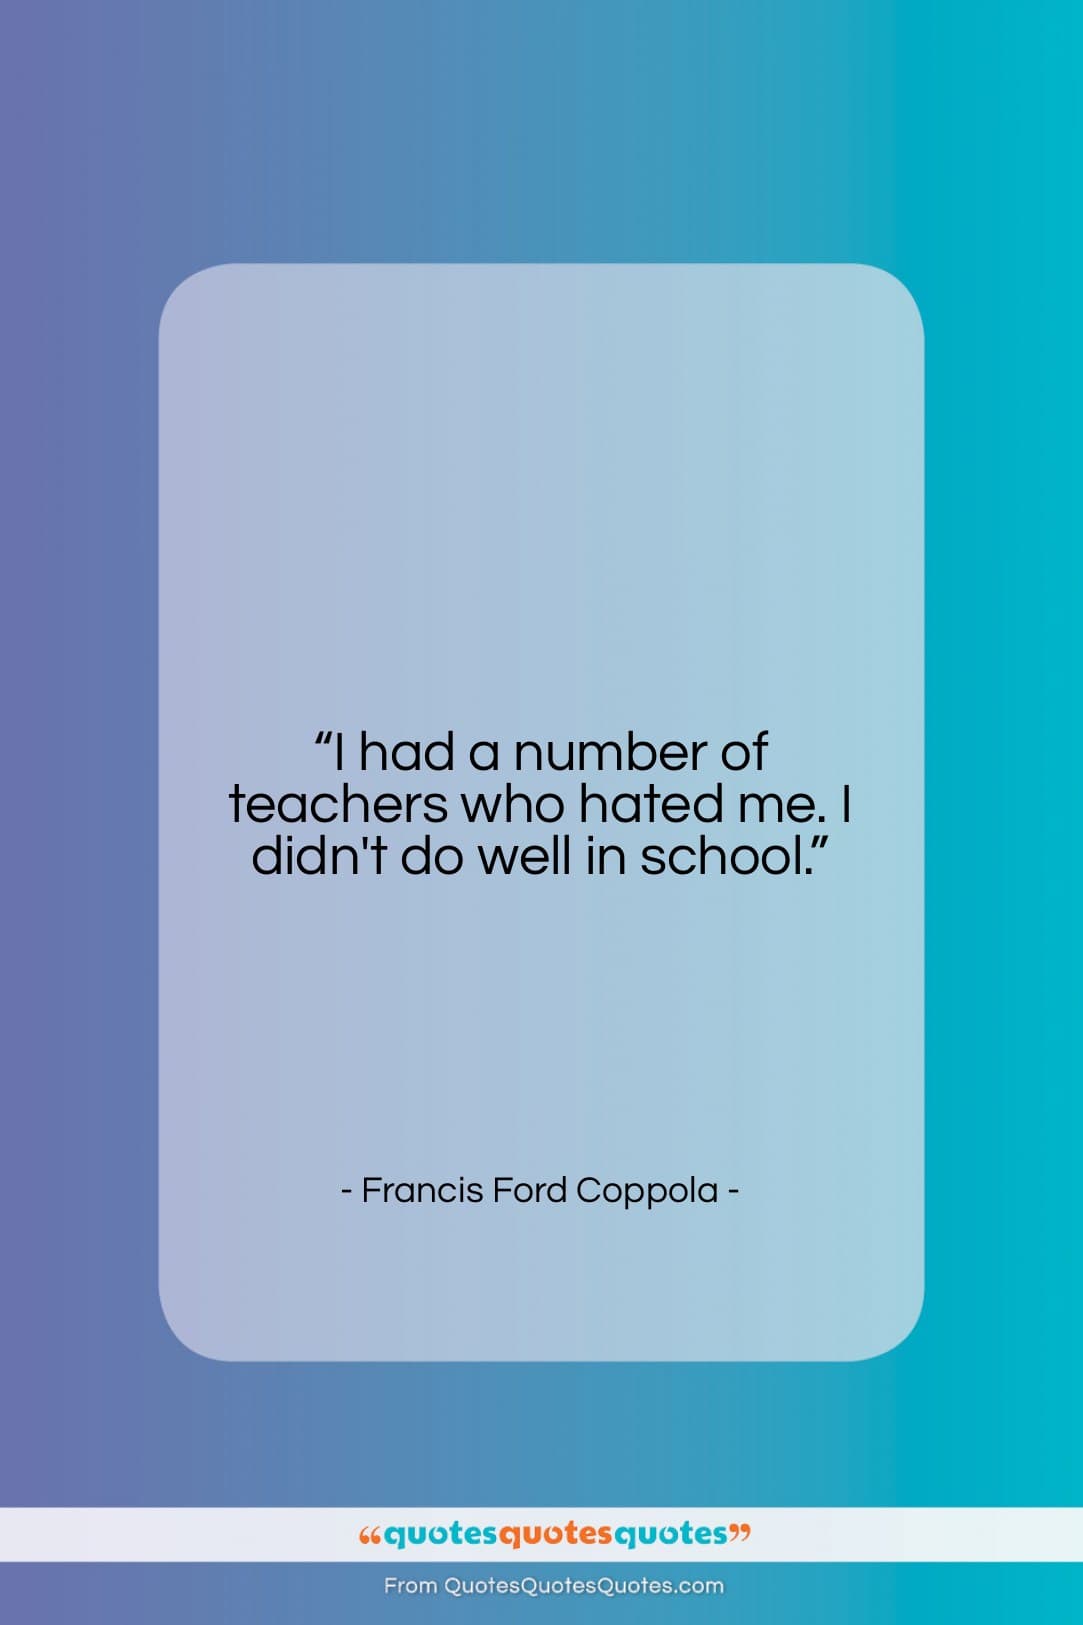 Francis Ford Coppola quote: “I had a number of teachers who…”- at QuotesQuotesQuotes.com